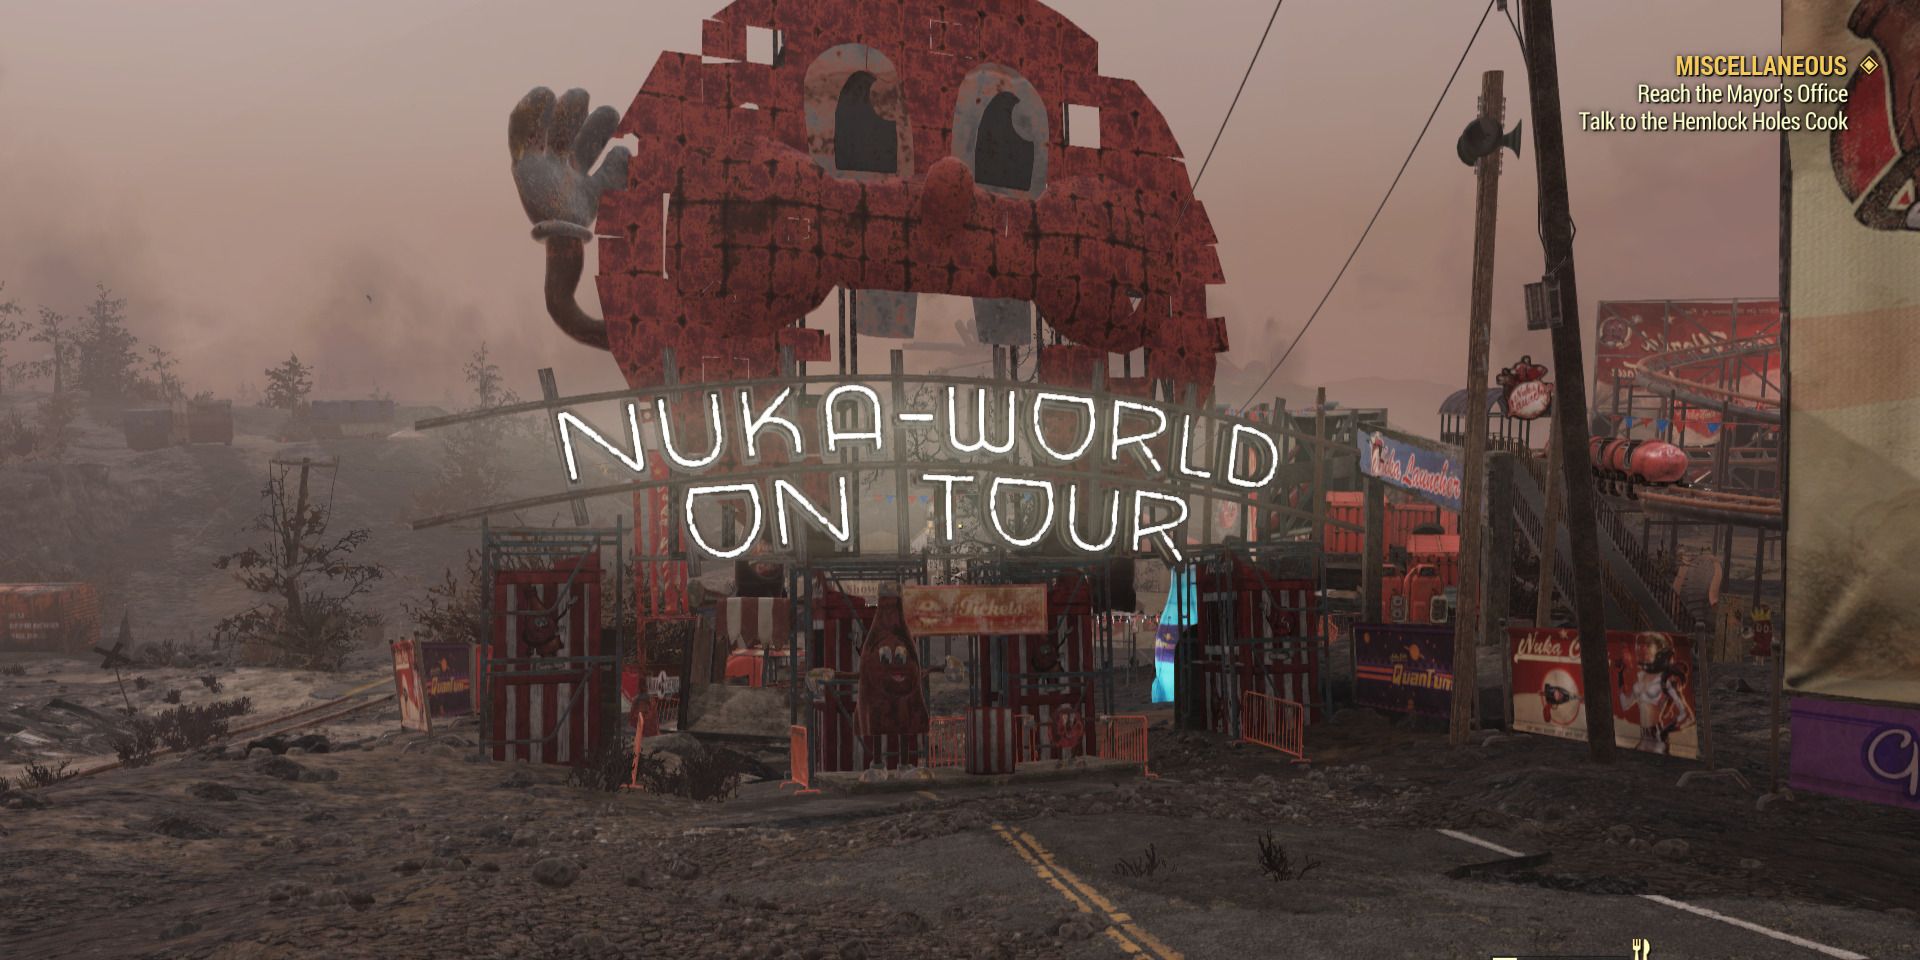 Image of the entrance to nuka world on tour in Fallout 76